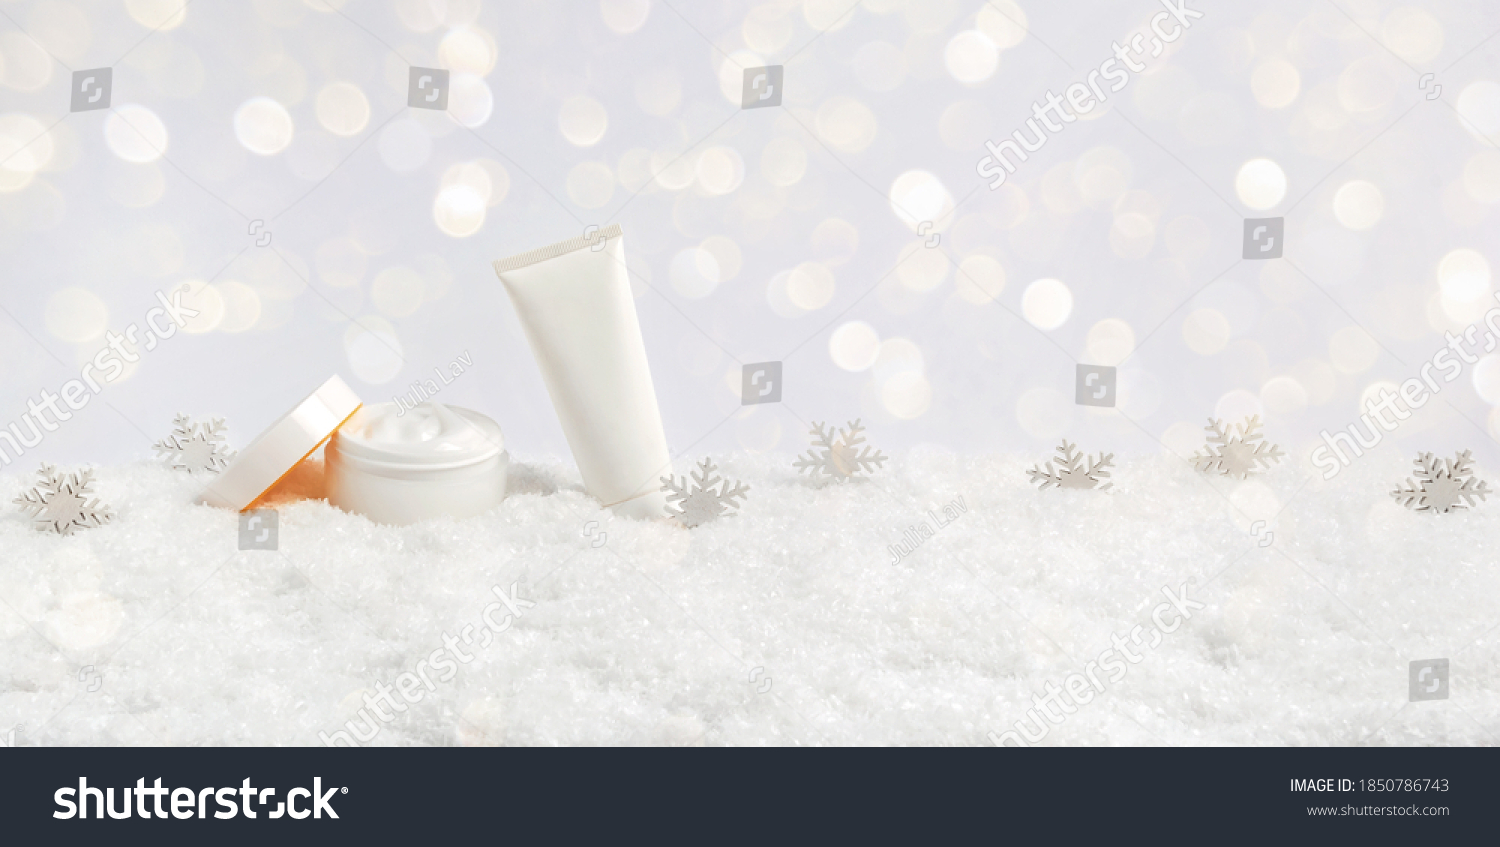 Winter skin care cosmetic products in snow and snowflakes on white background with bokeh lights. Opened face cream jar and hand creme or body lotion tube. Festive banner with copy space for text #1850786743